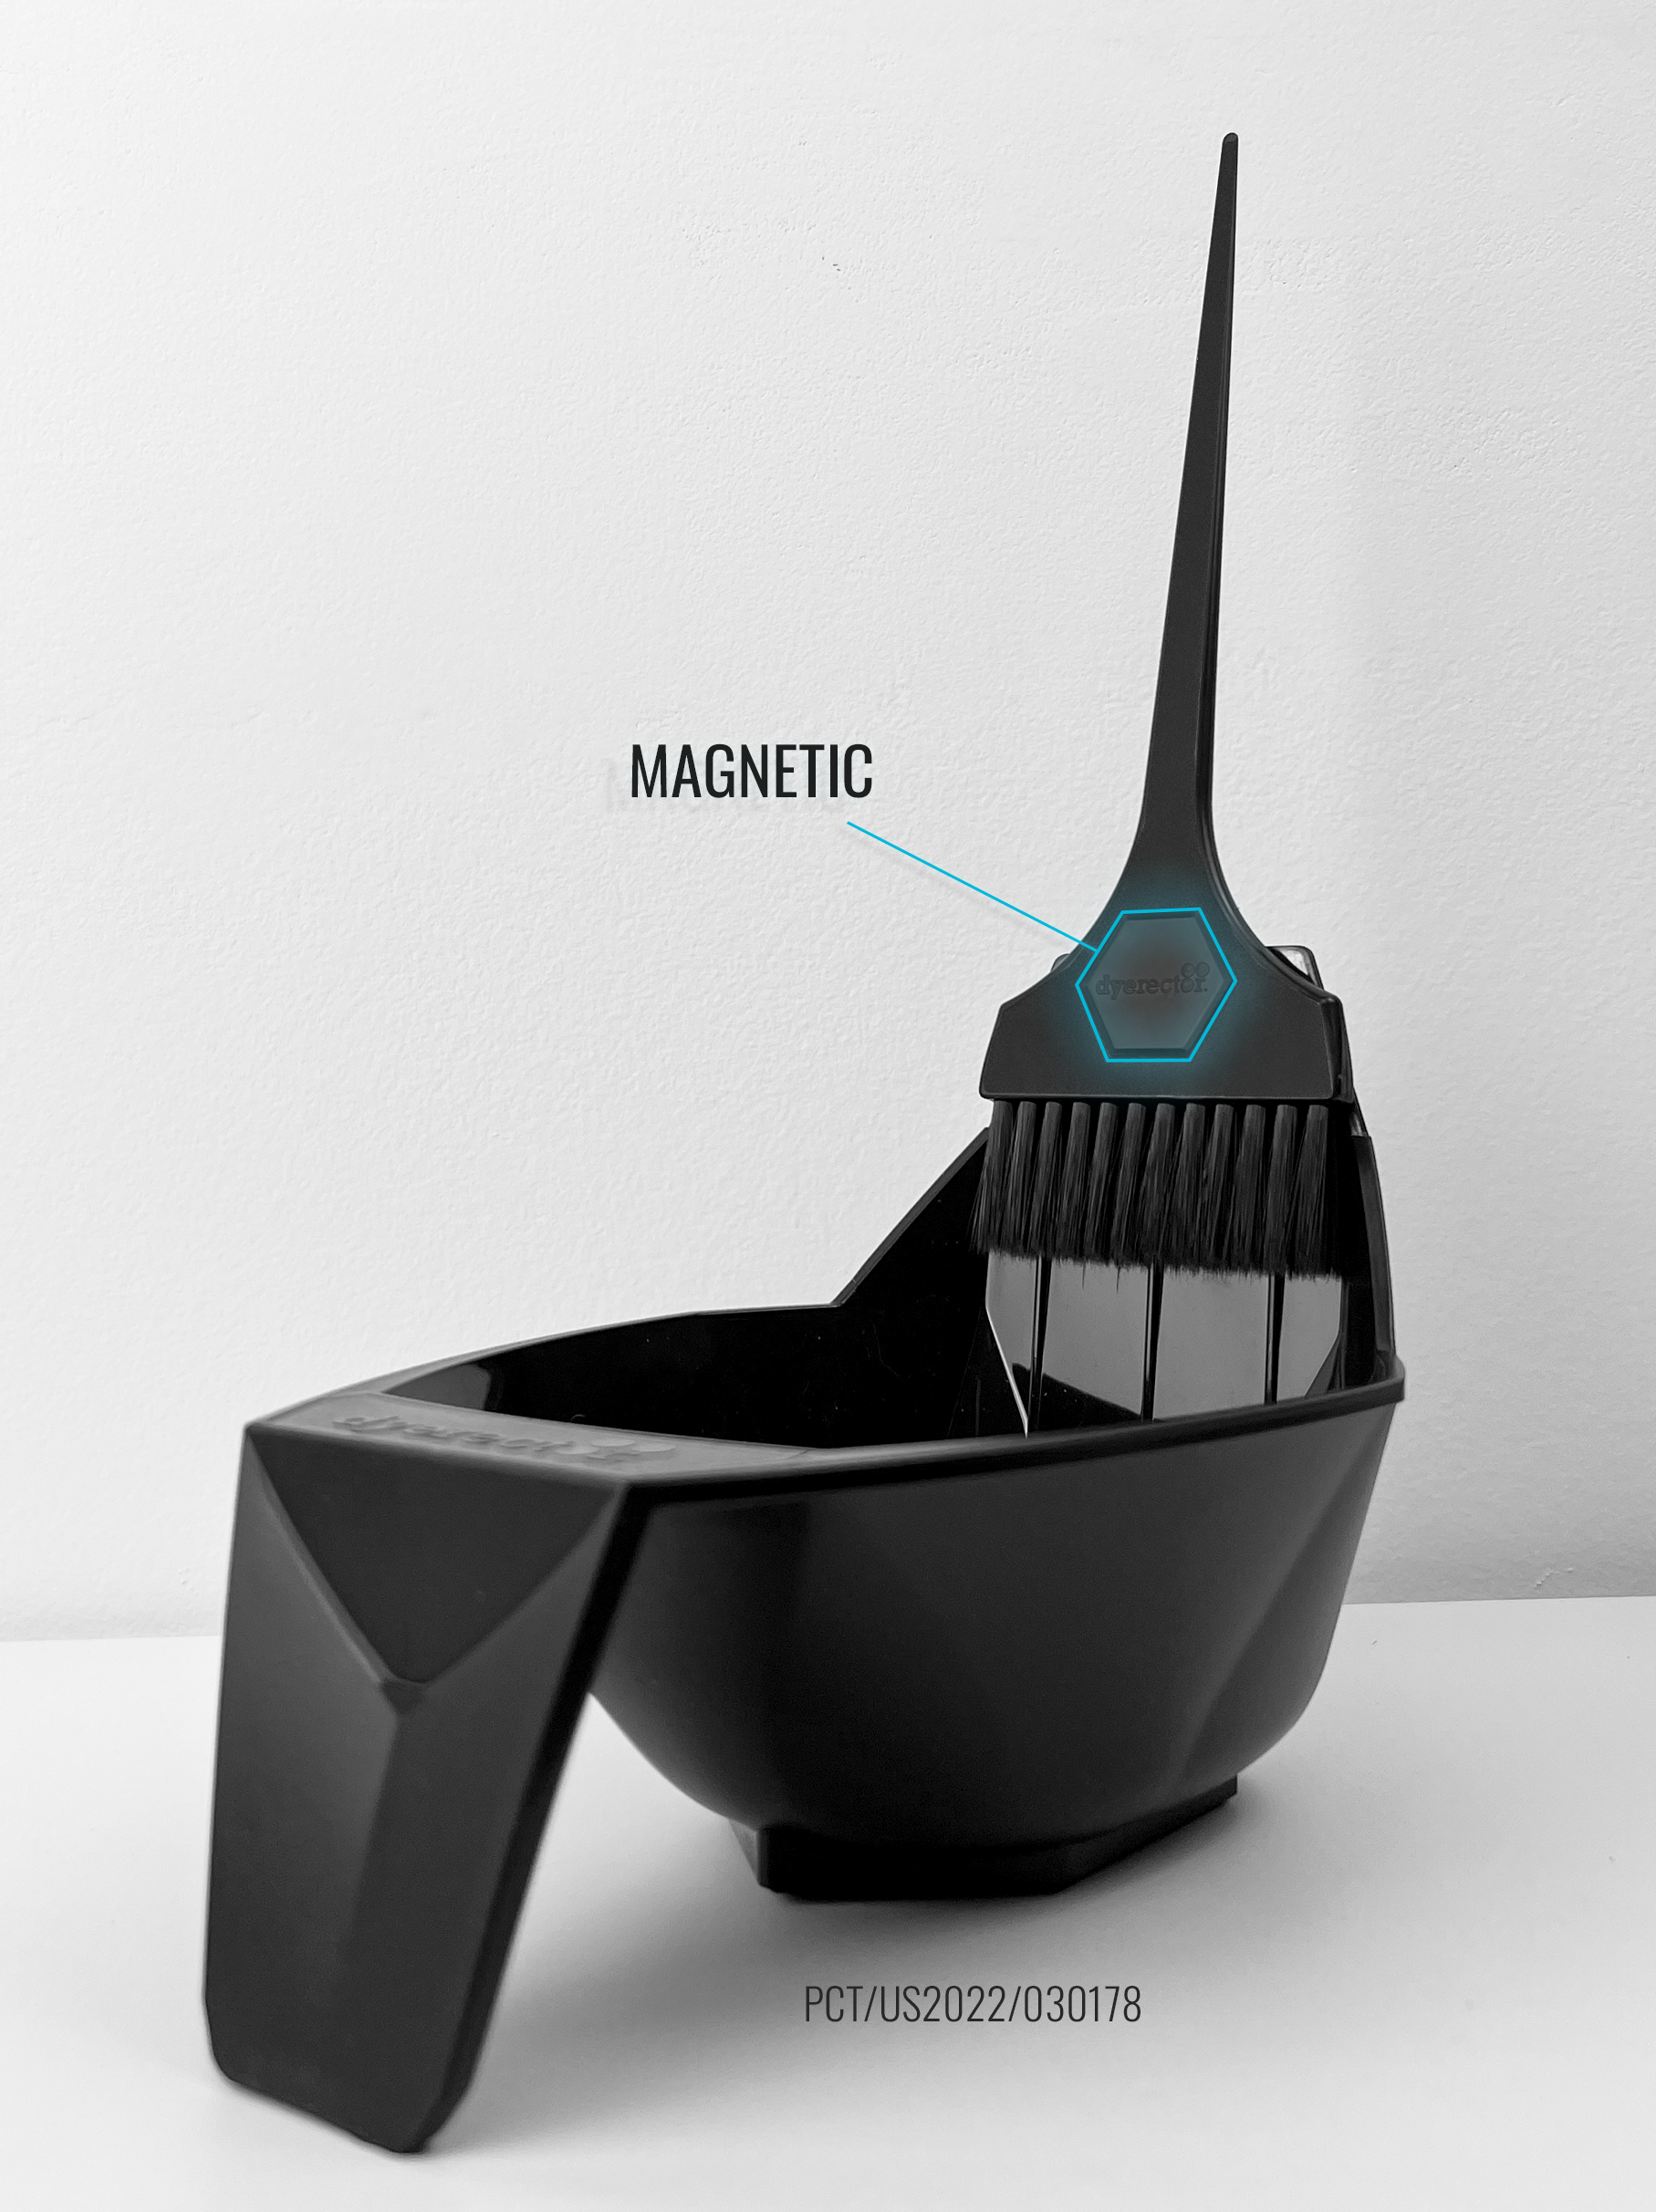 Black magnetic hair color bowl that is holding the brush out of the bowl by magnets.